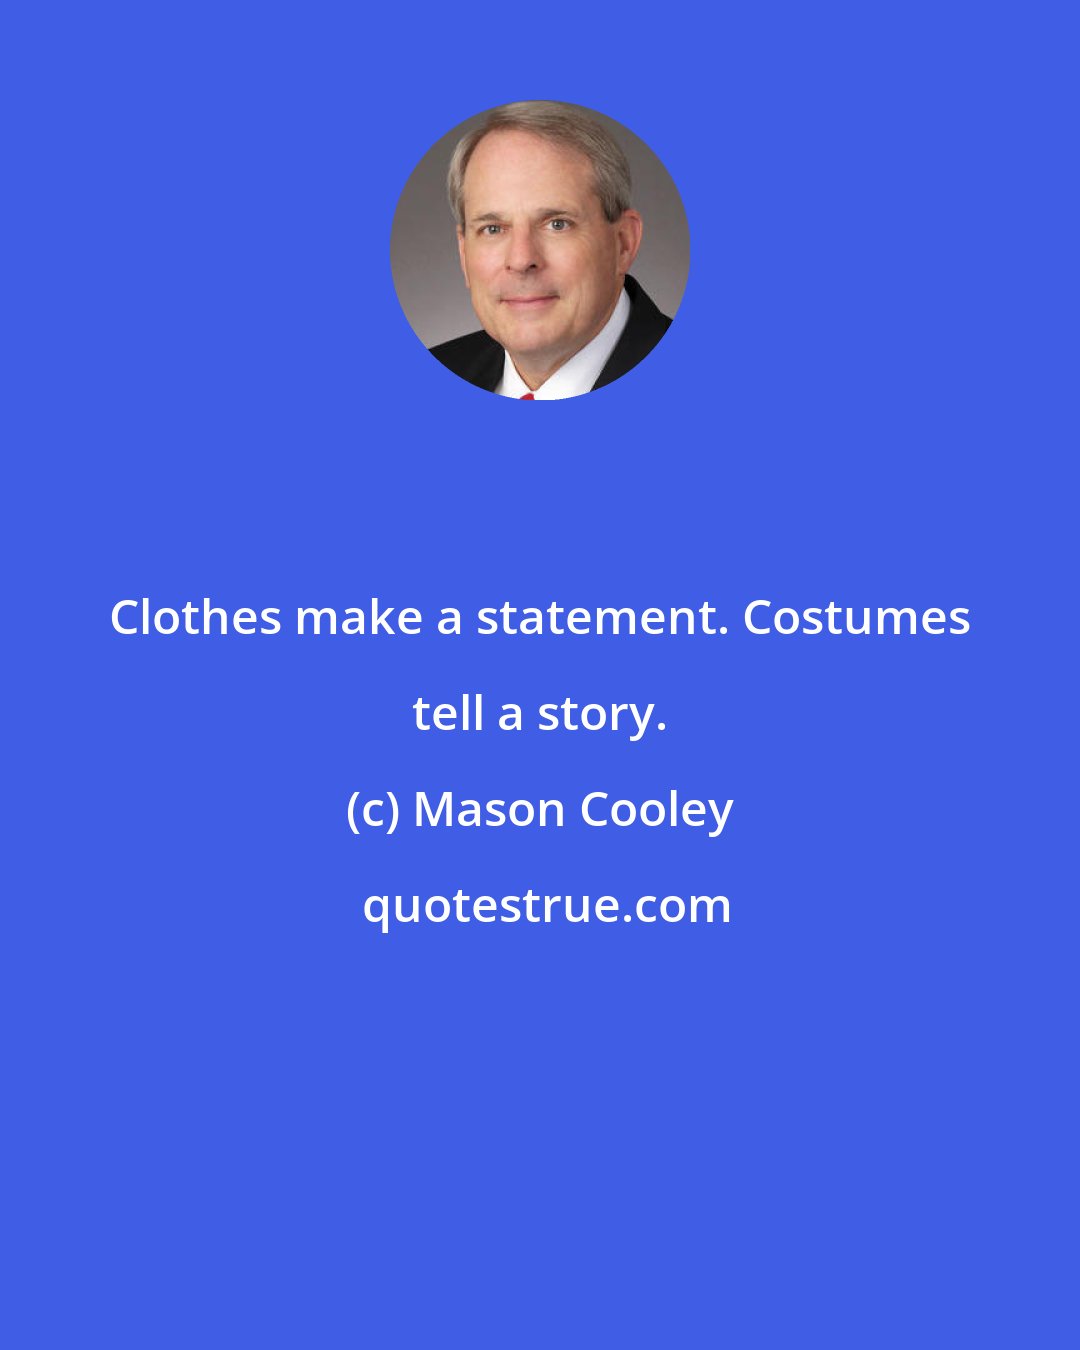 Mason Cooley: Clothes make a statement. Costumes tell a story.